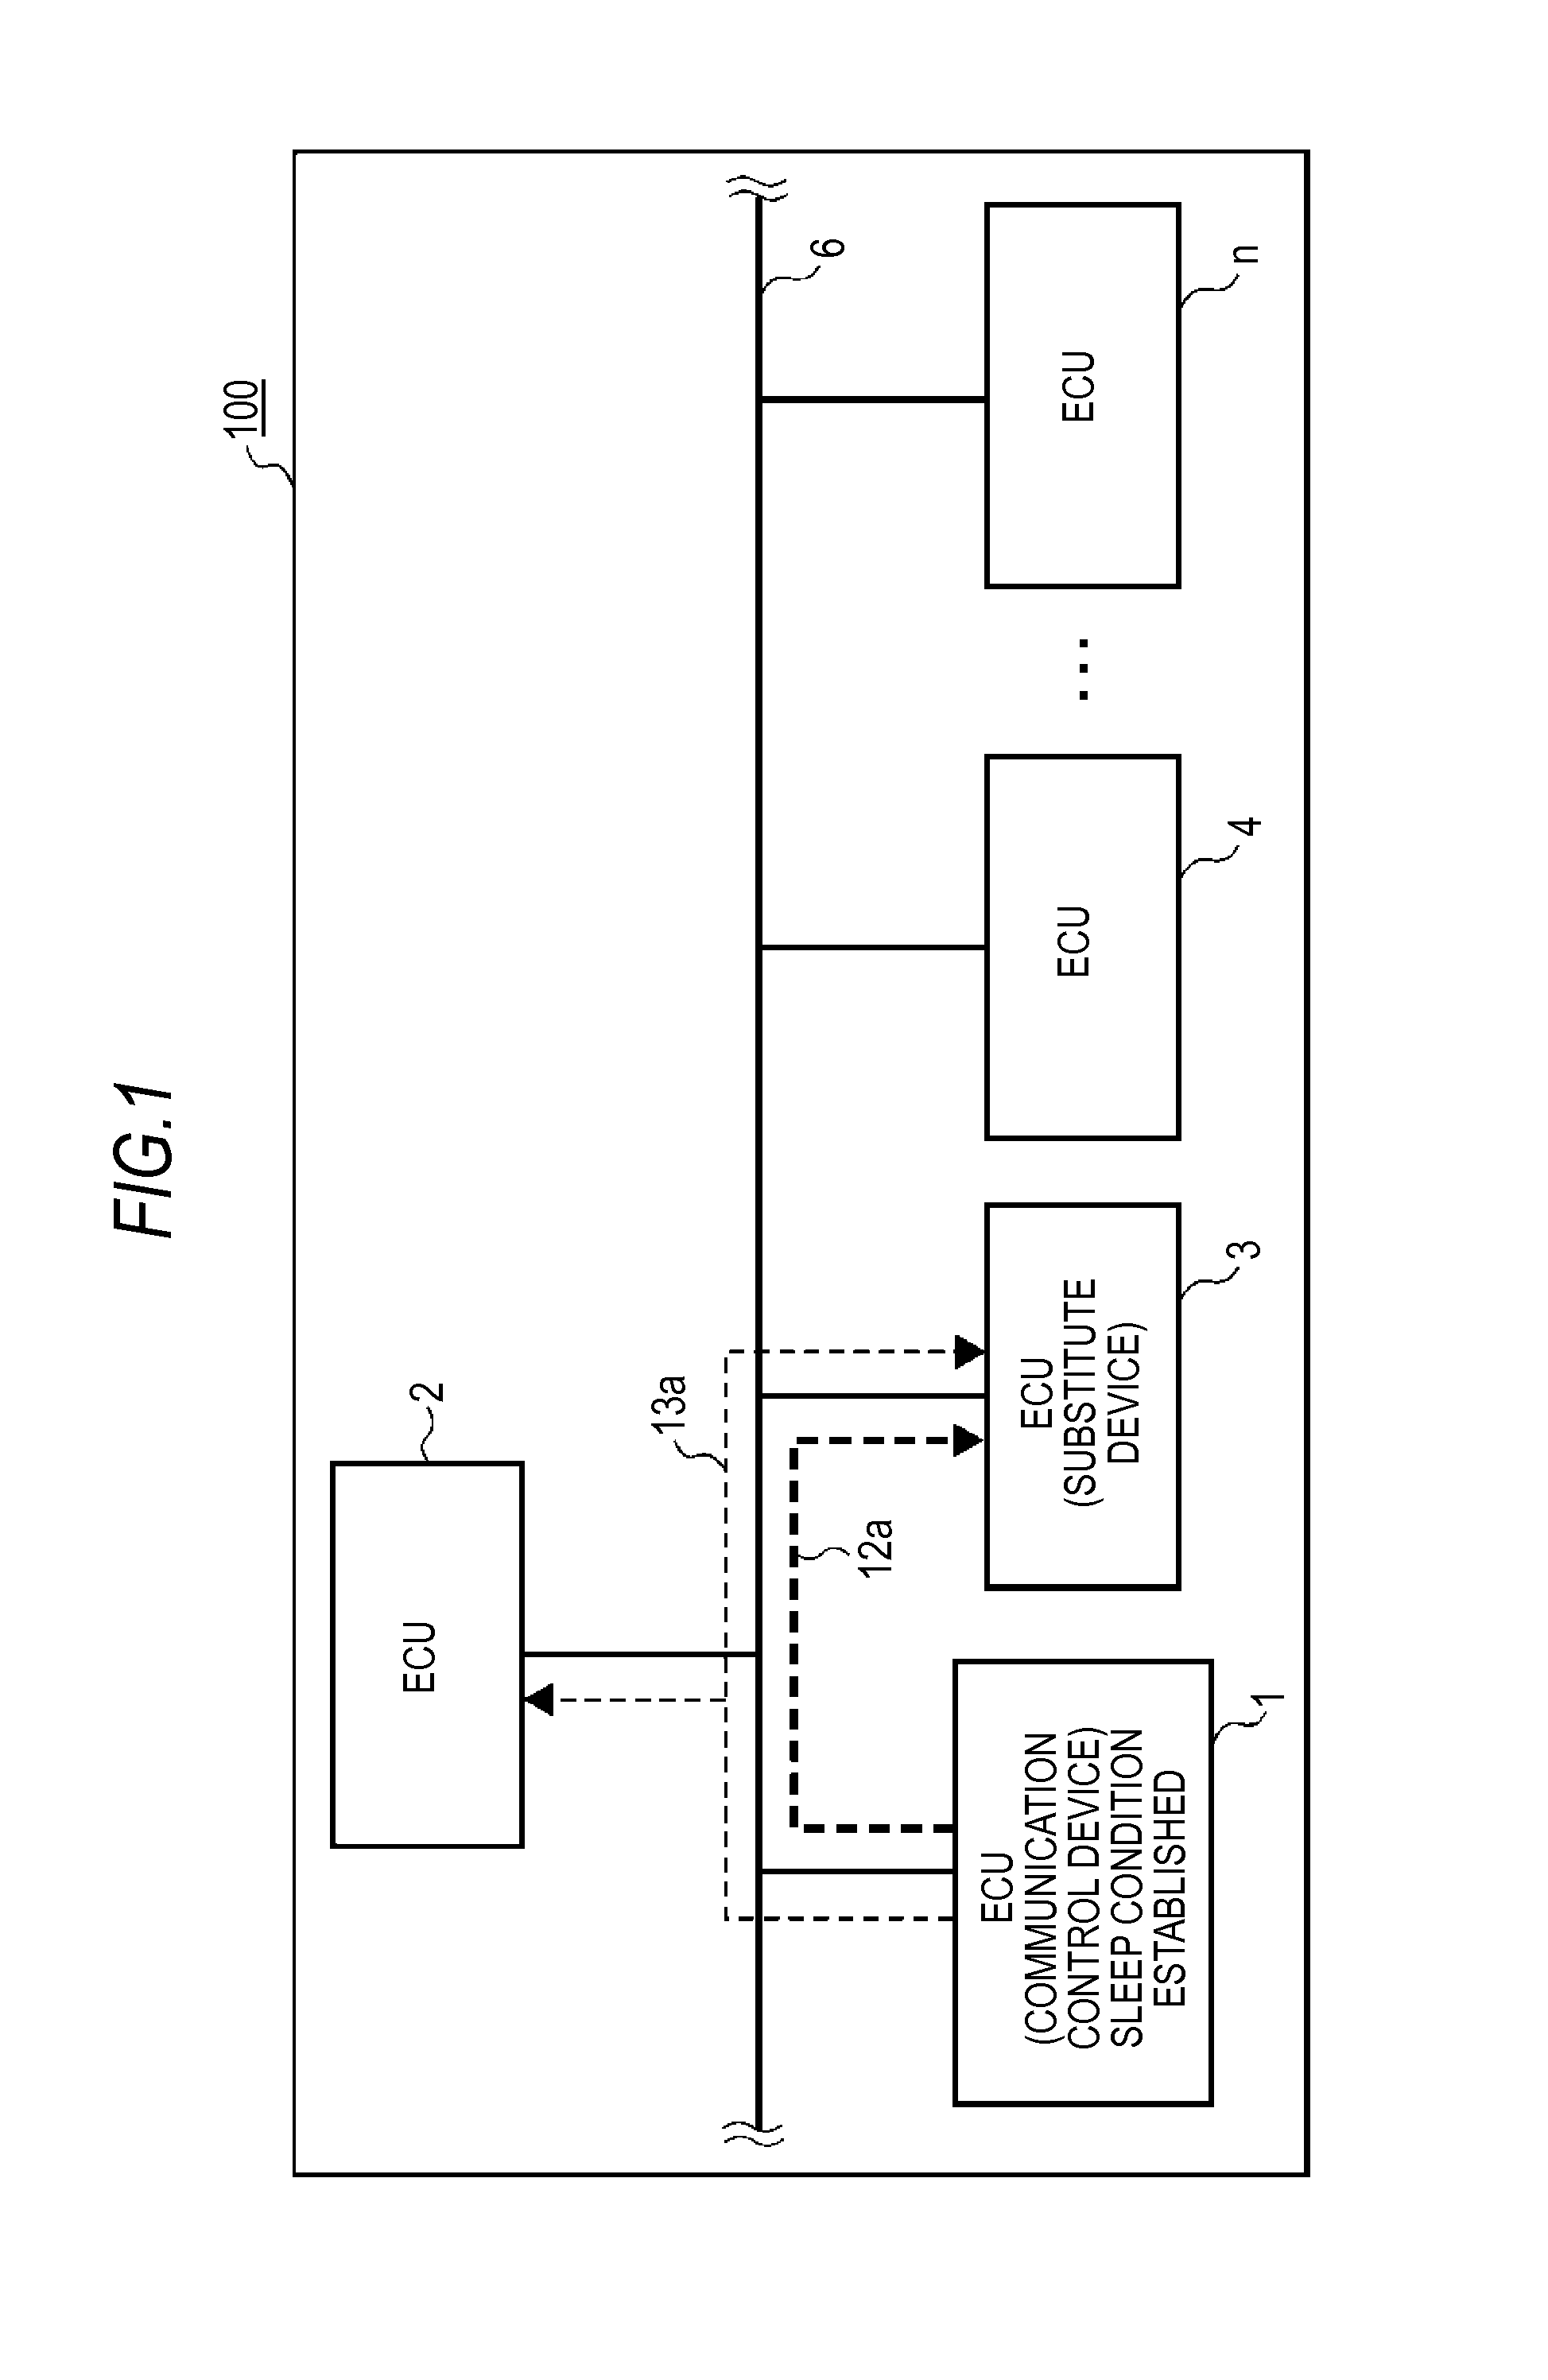 Control device switching system